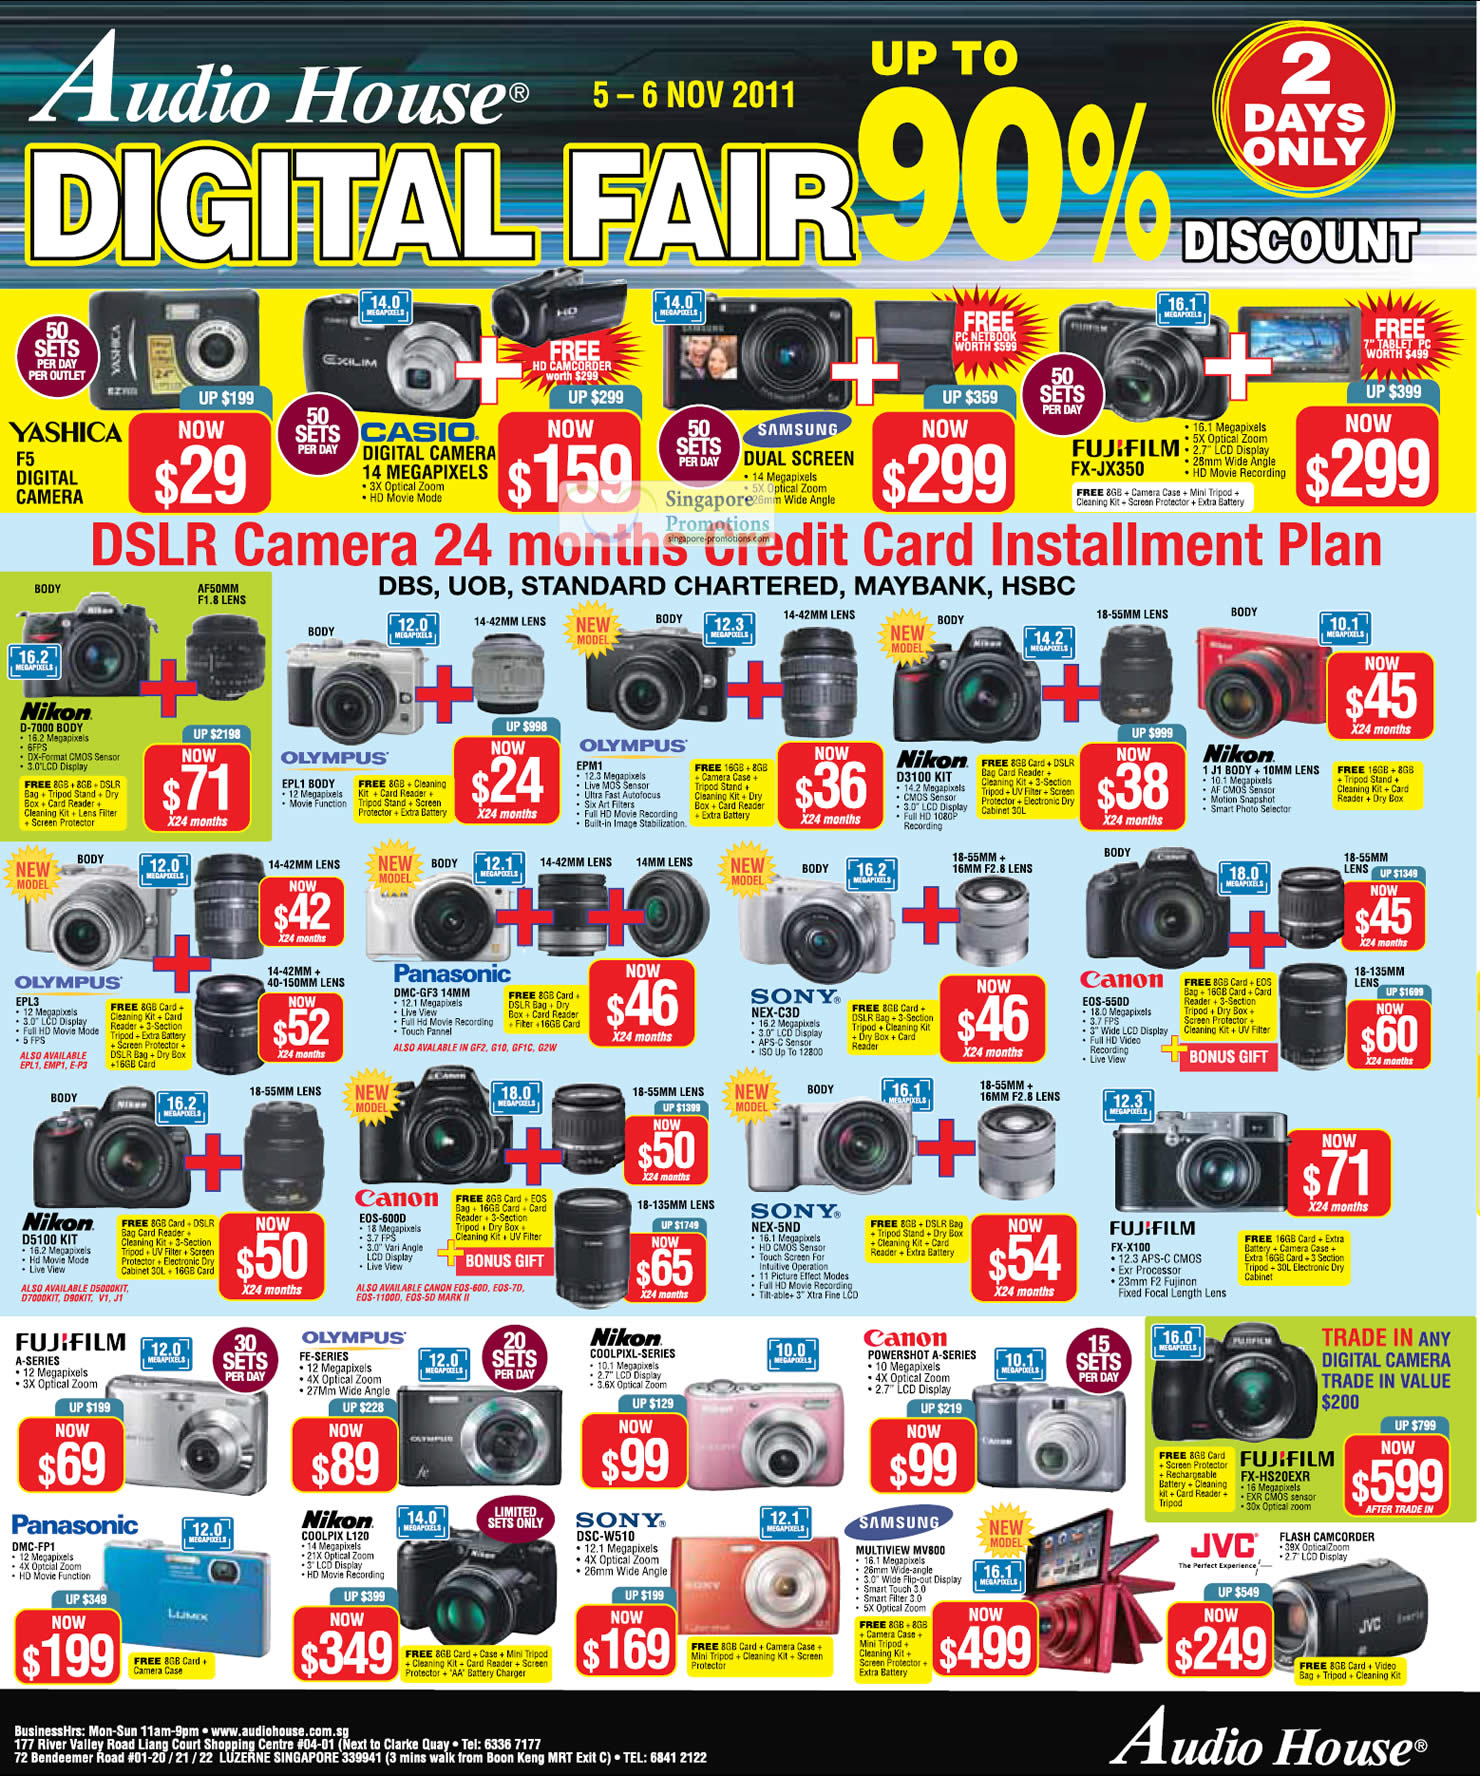 Featured image for Audio House Digital Fair Up To 90% Off 5 - 6 Nov 2011